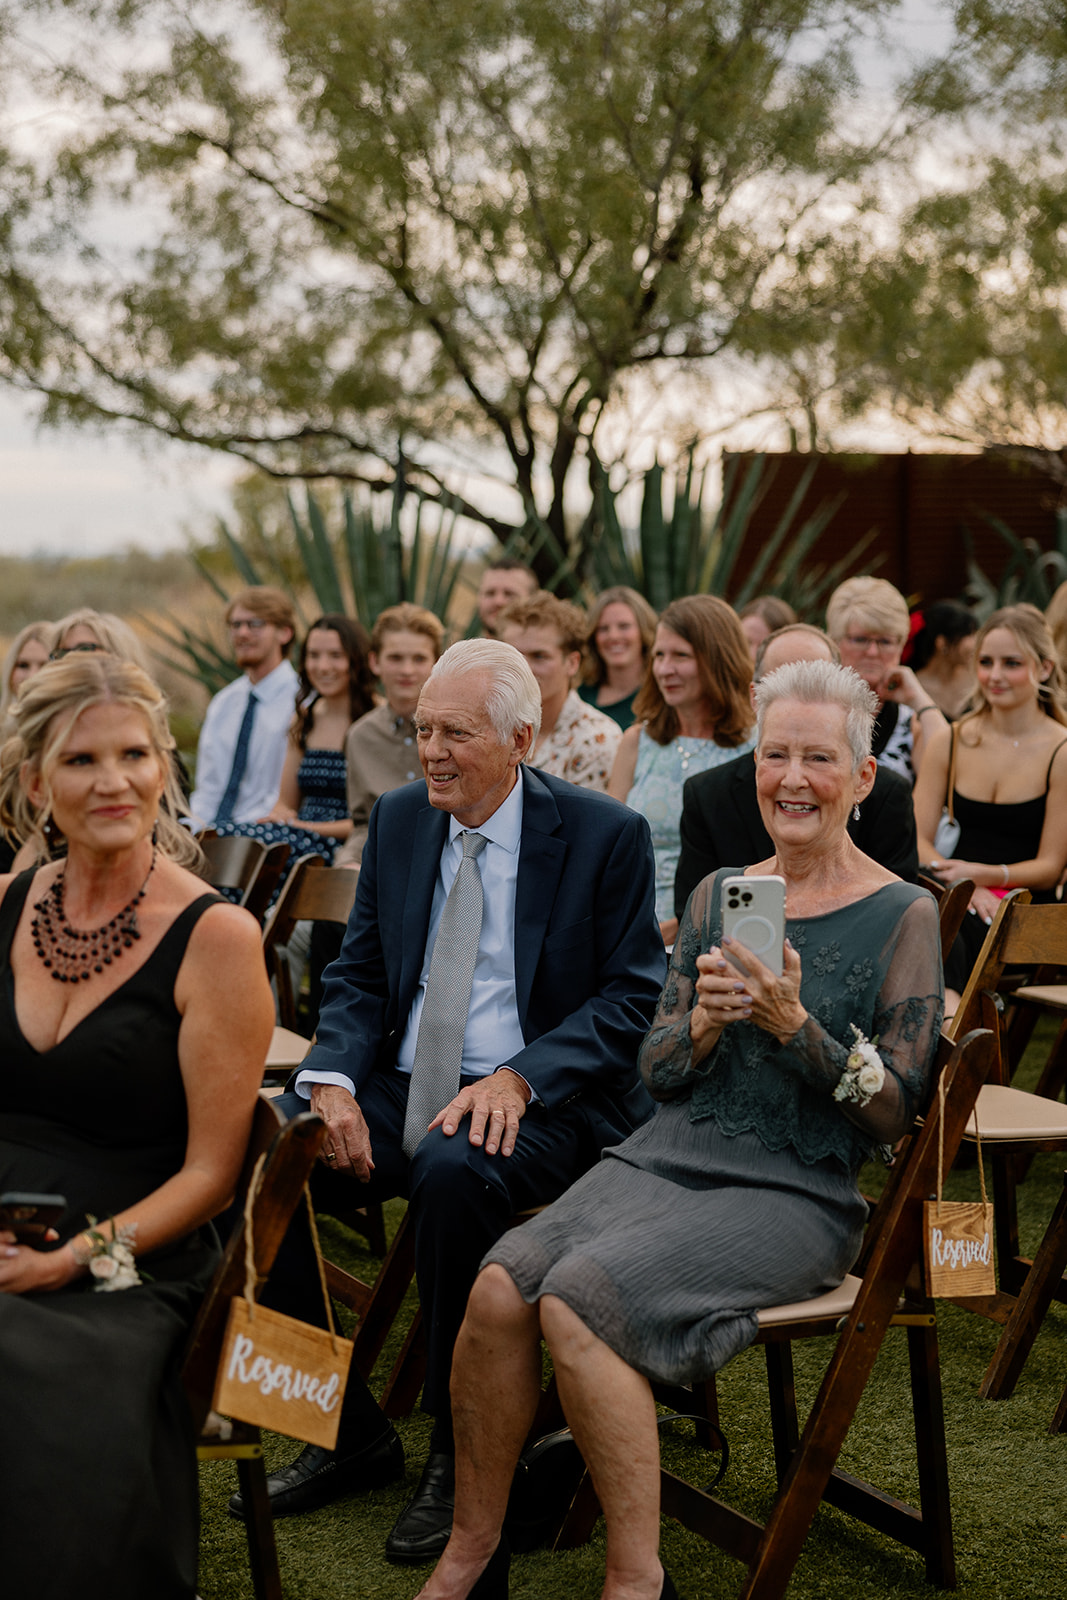 guests look on with a smile as the stunning bride enters the dreamy Arizona wedding day